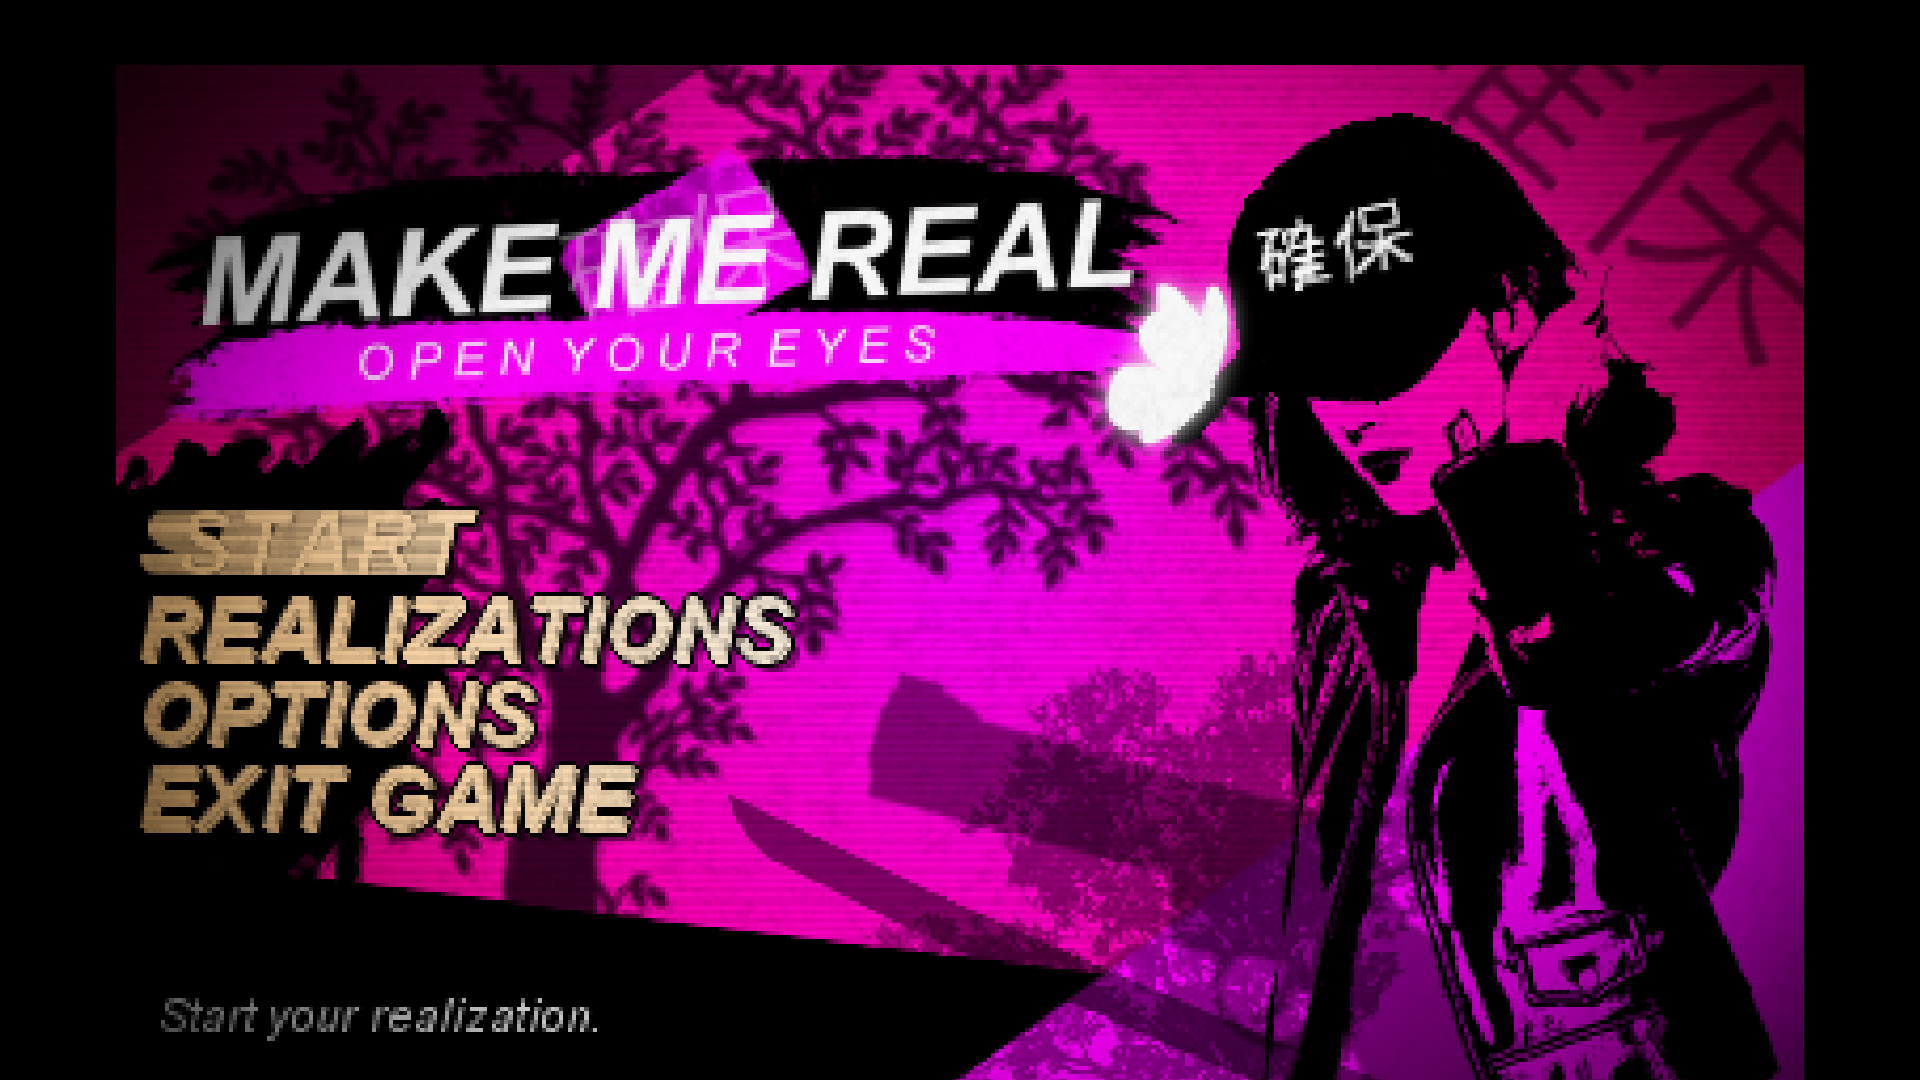 Make me real. Make me real open your Eyes. Riaru make me real. Make me real rainpour.